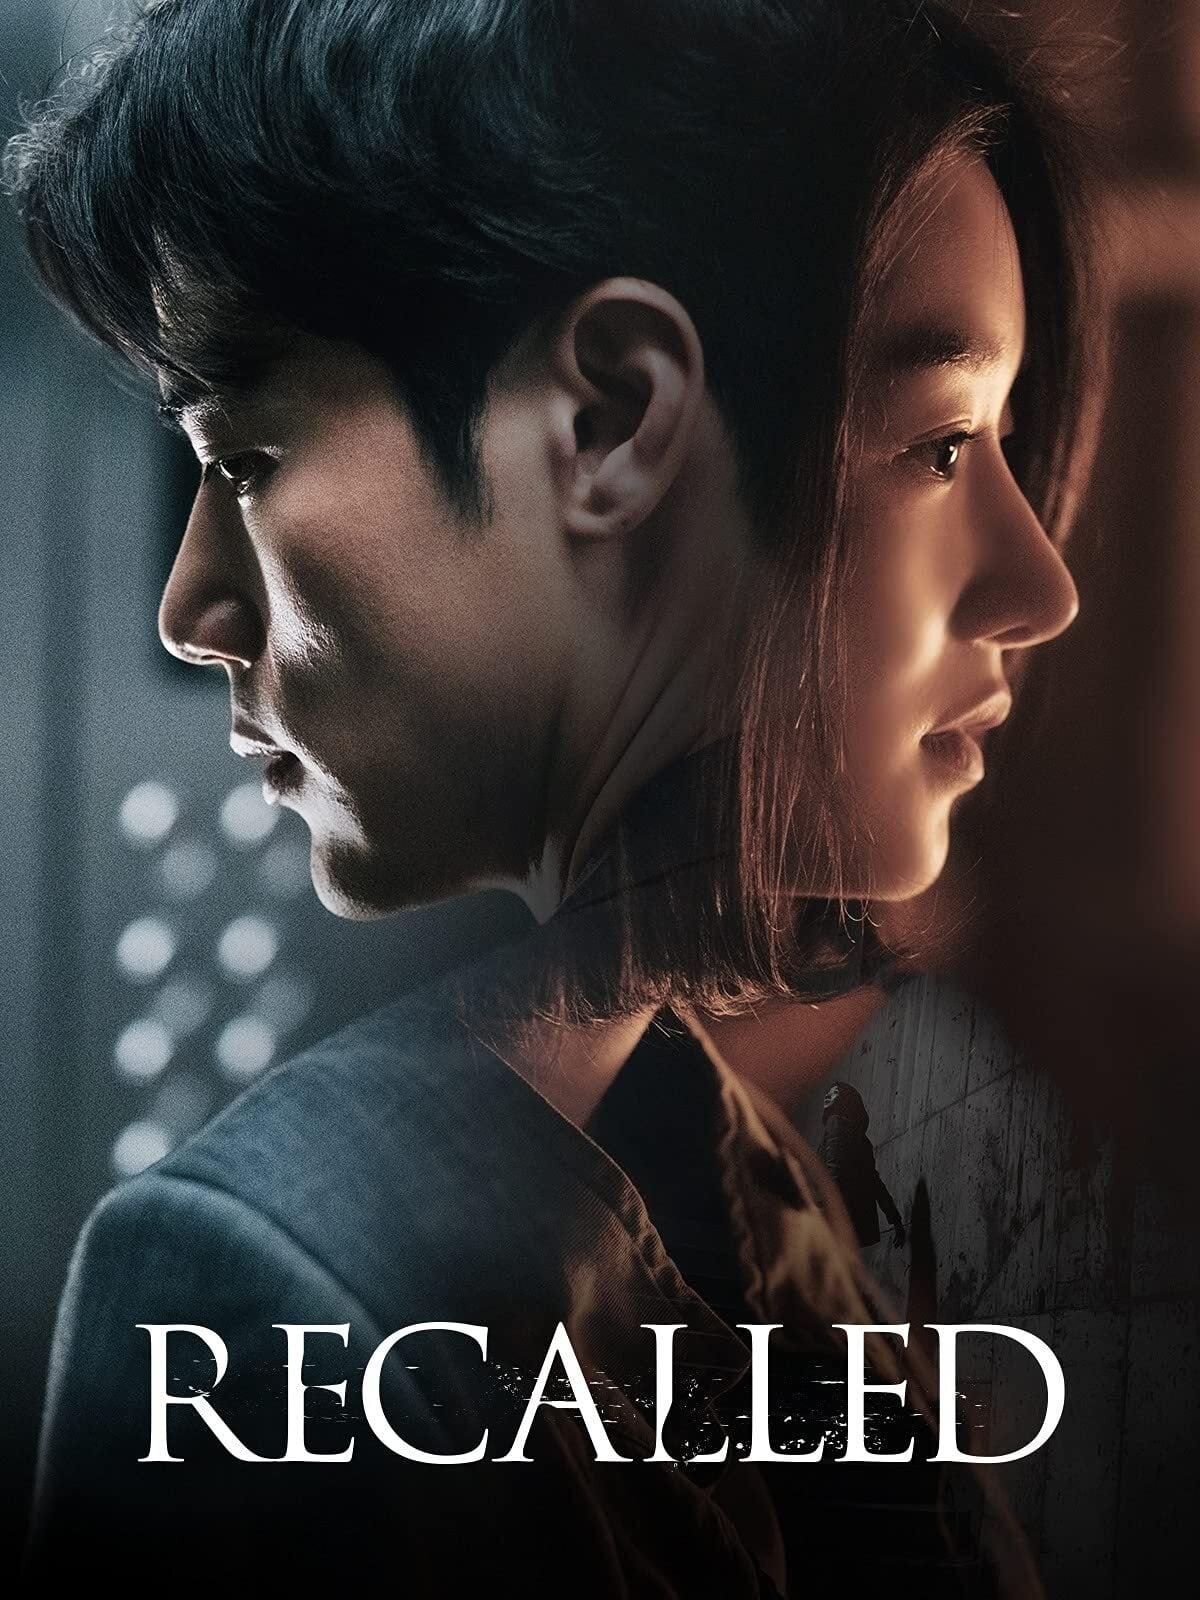 Recalled poster